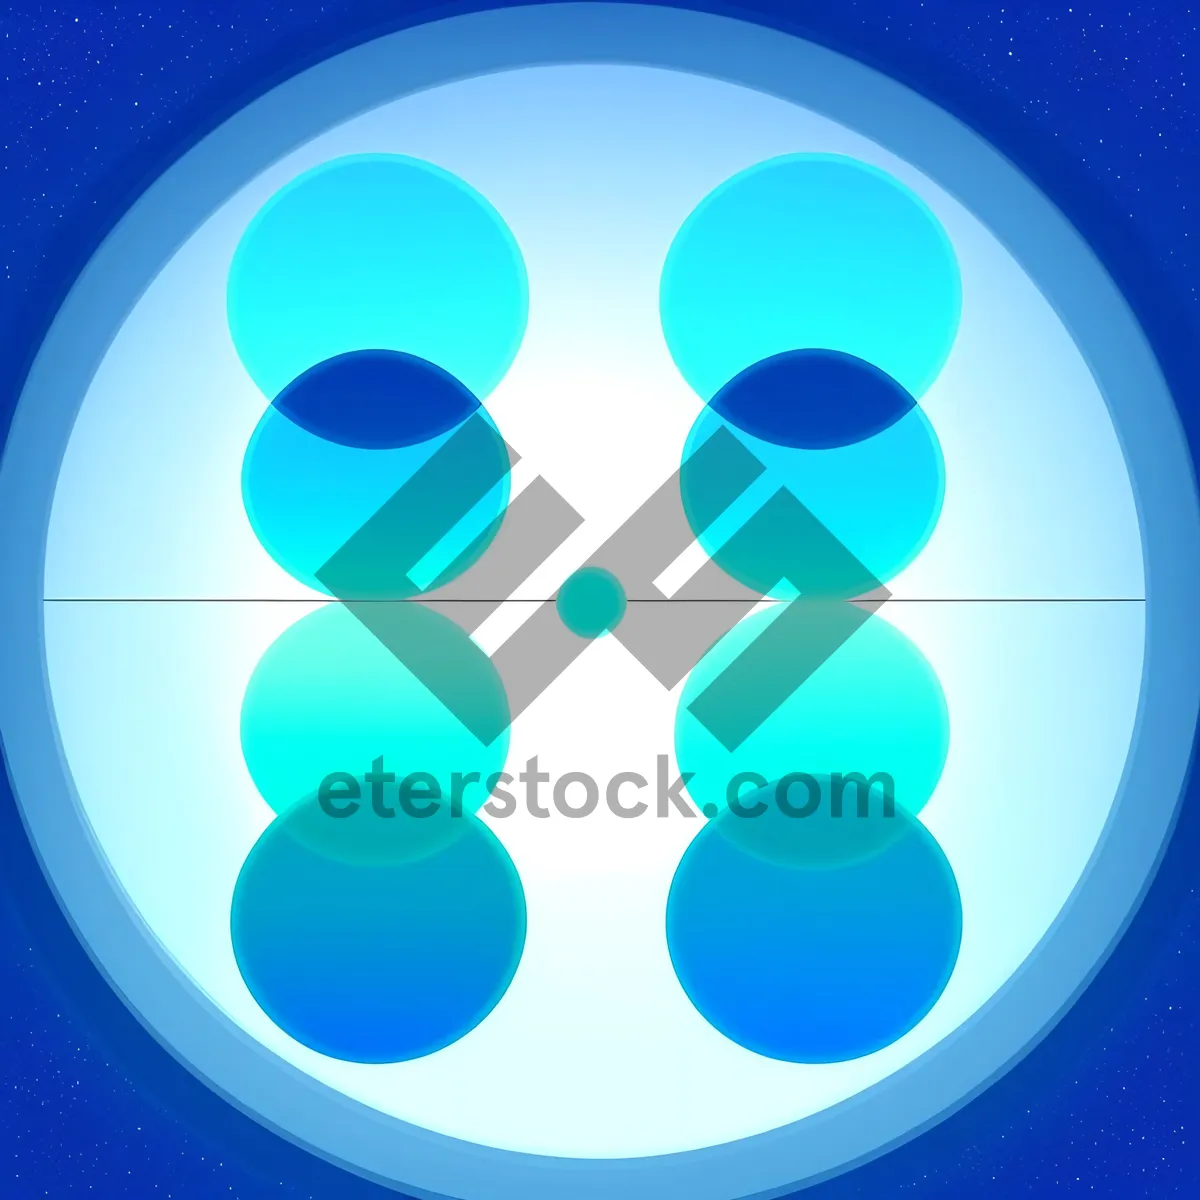 Picture of Shiny Button Set: Round, Glossy Web Icons with a Glass Reflection